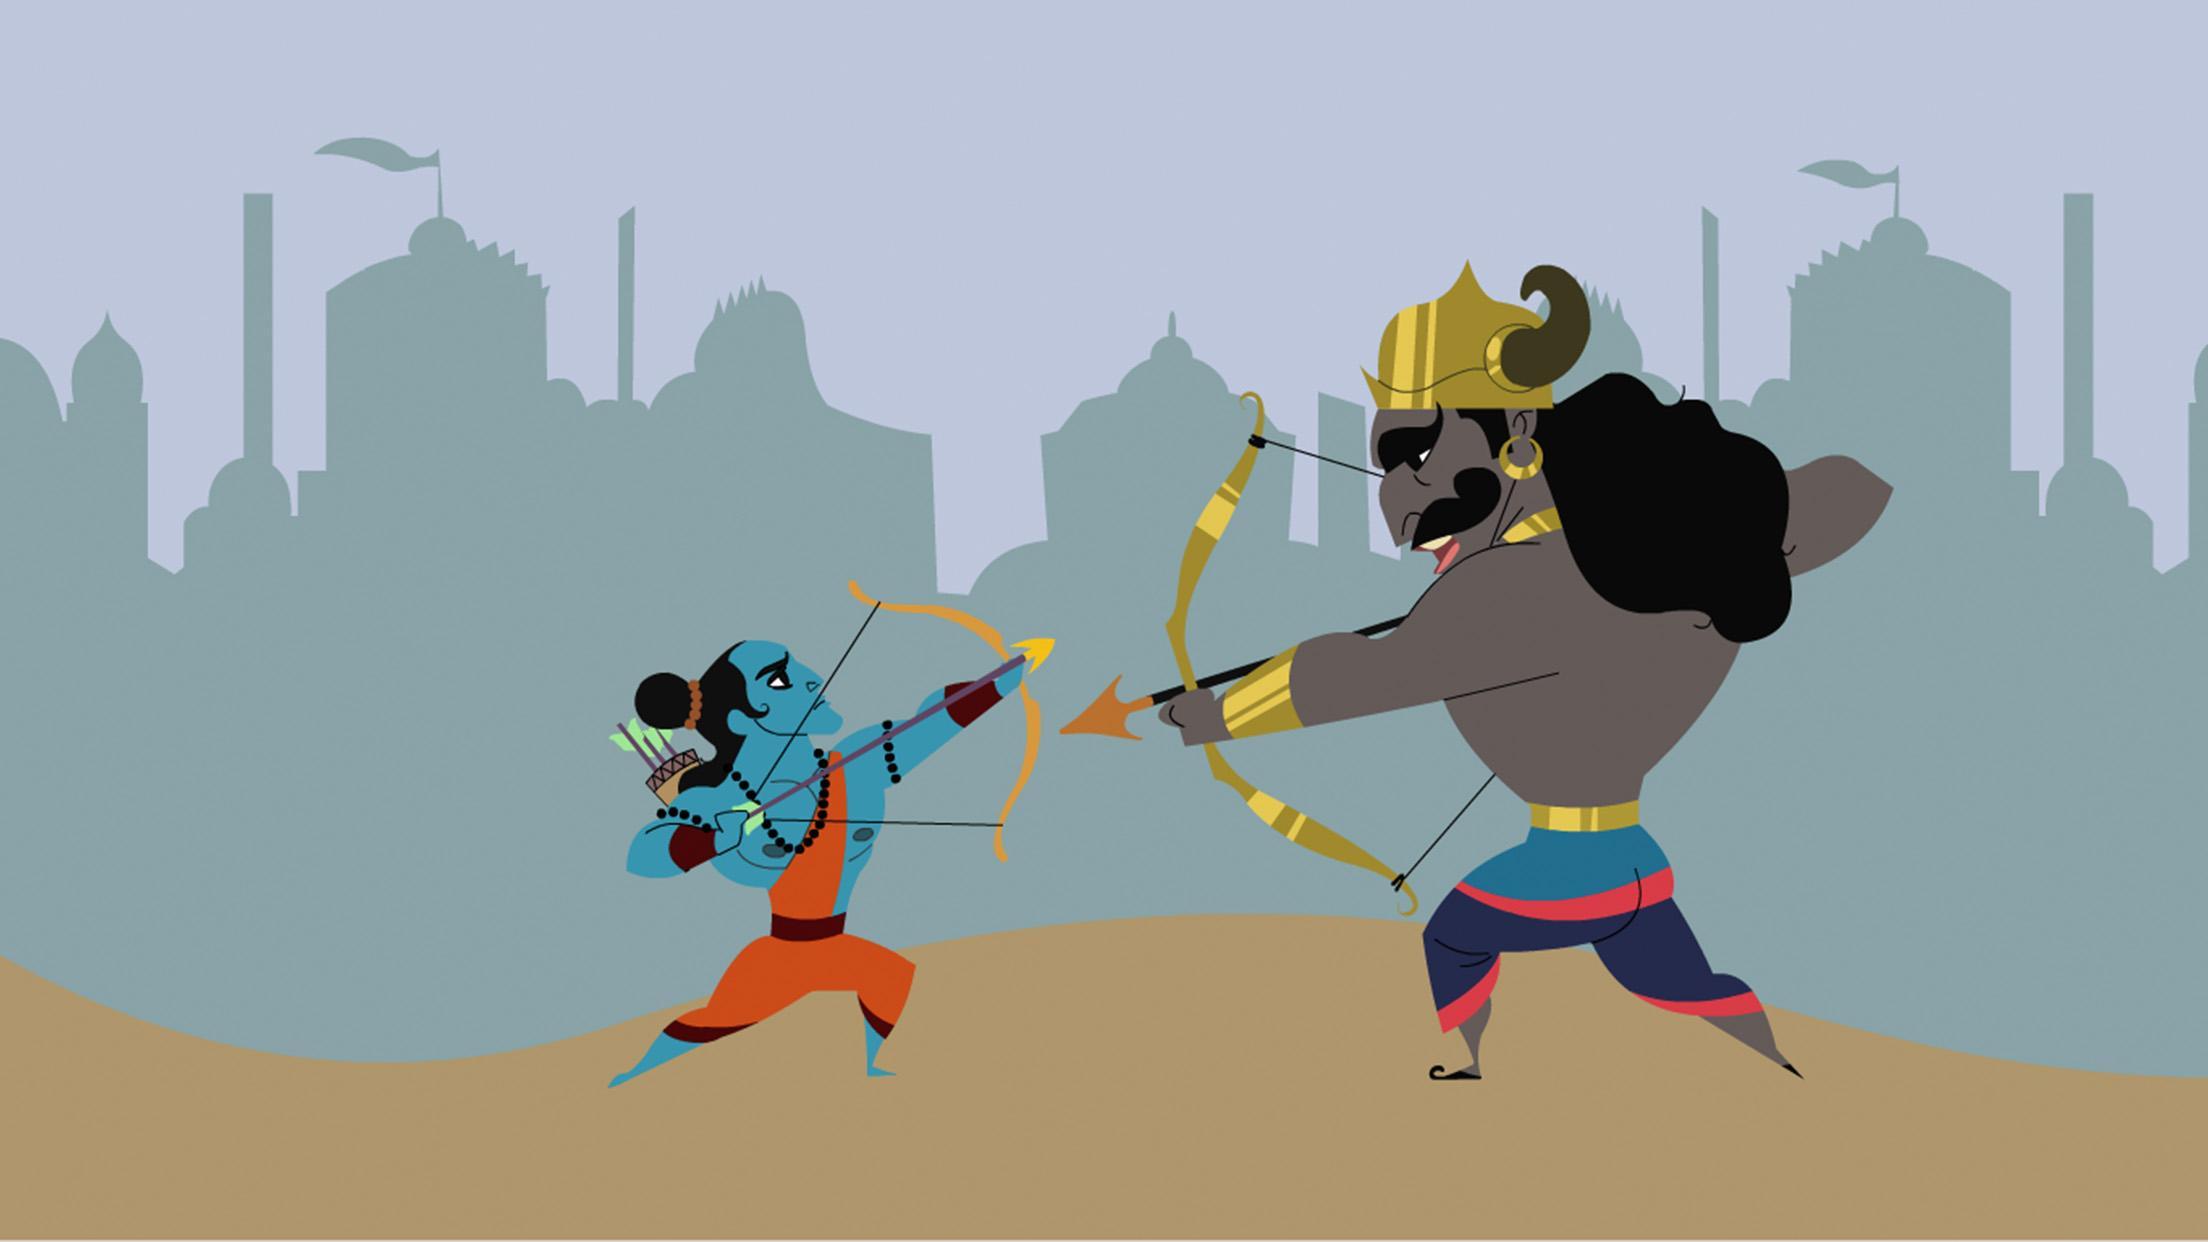 Trip to Ayodhya for Android - APK Download